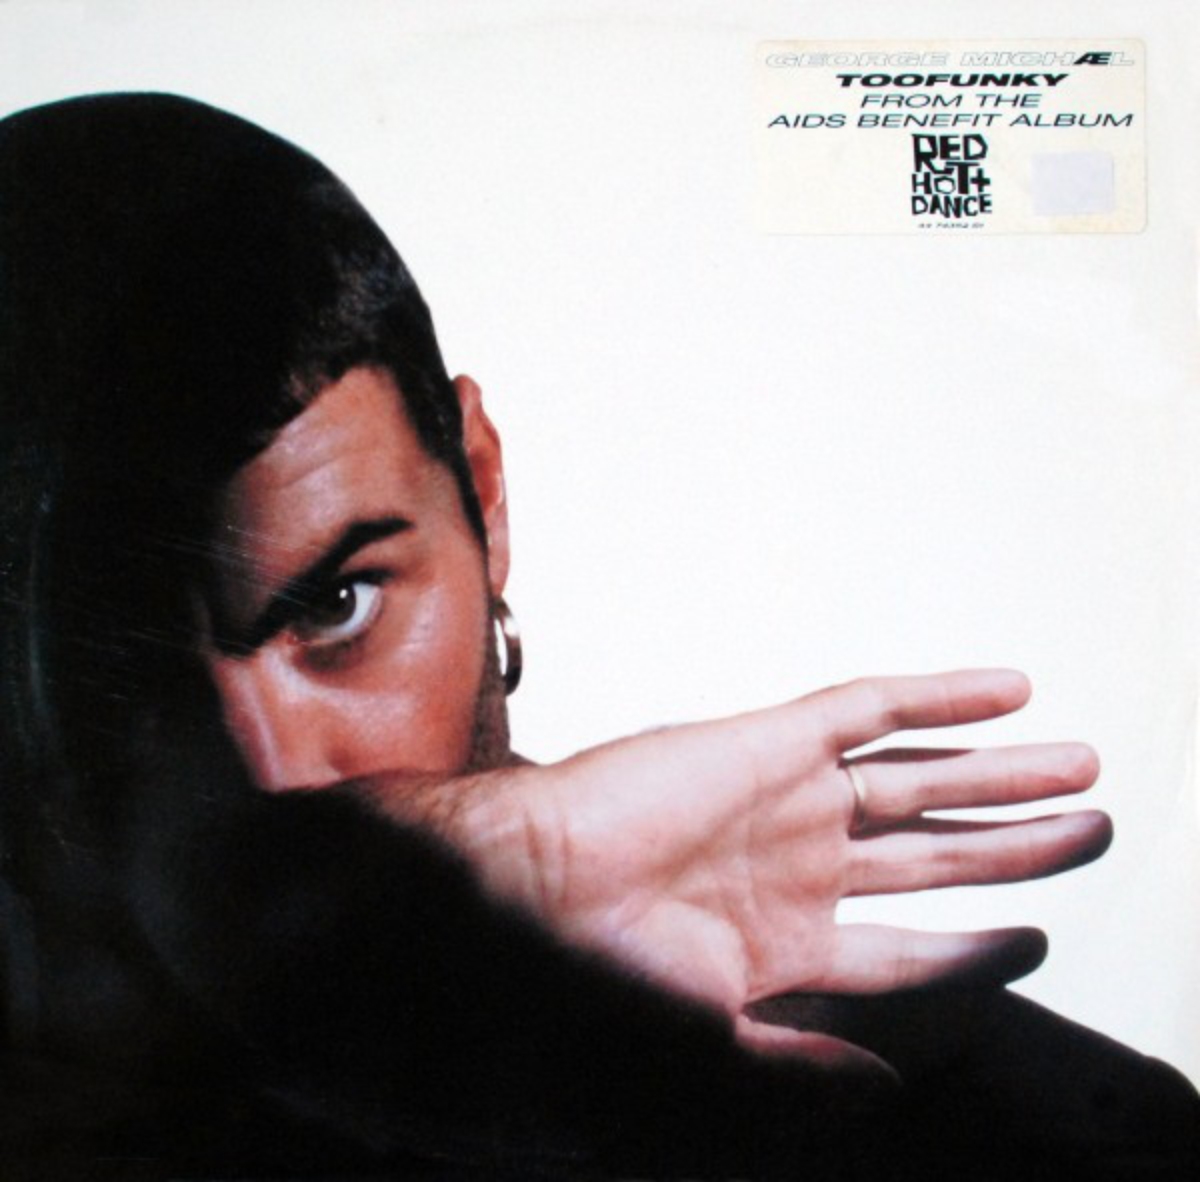 "Too Funky" single cover by George Michael